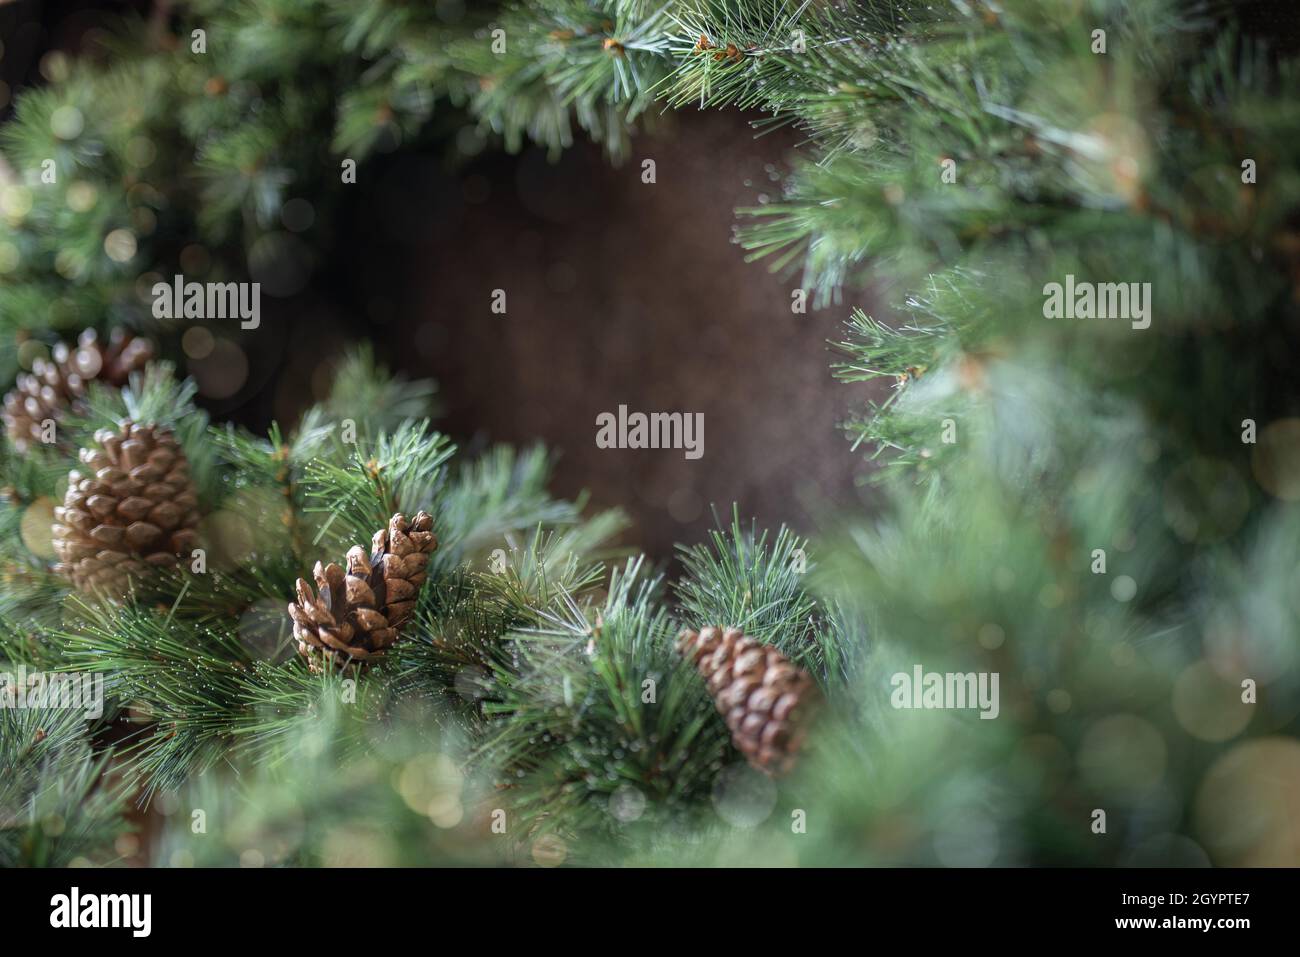 Border from green fir tree with pine cones. Stock Photo